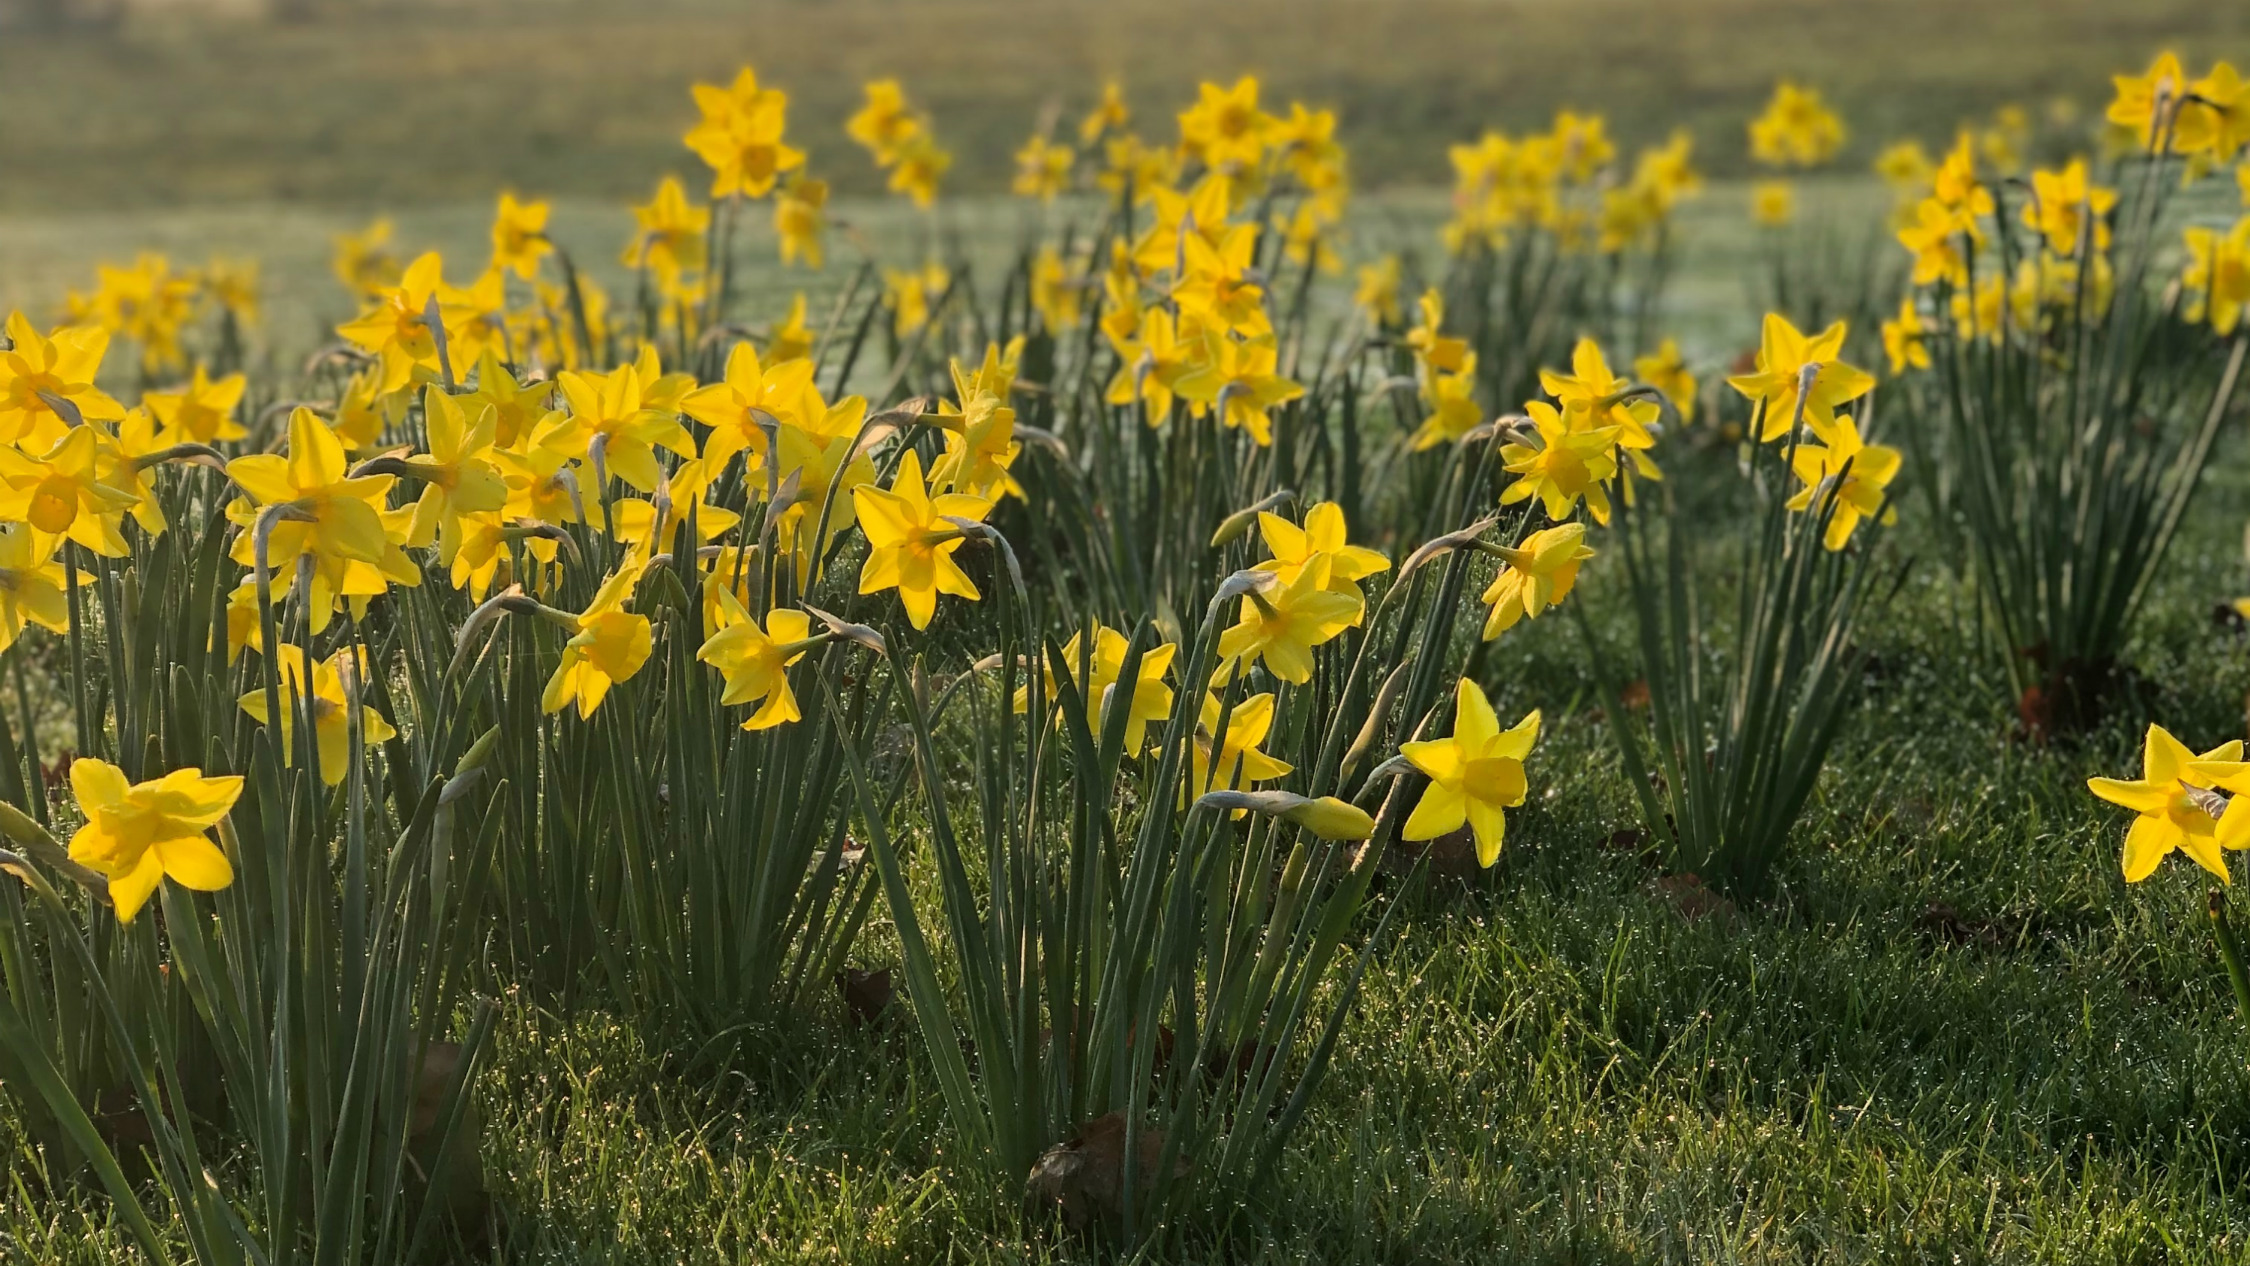 Kyneton Daffodil and Arts Festival | Things to do in Melbourne